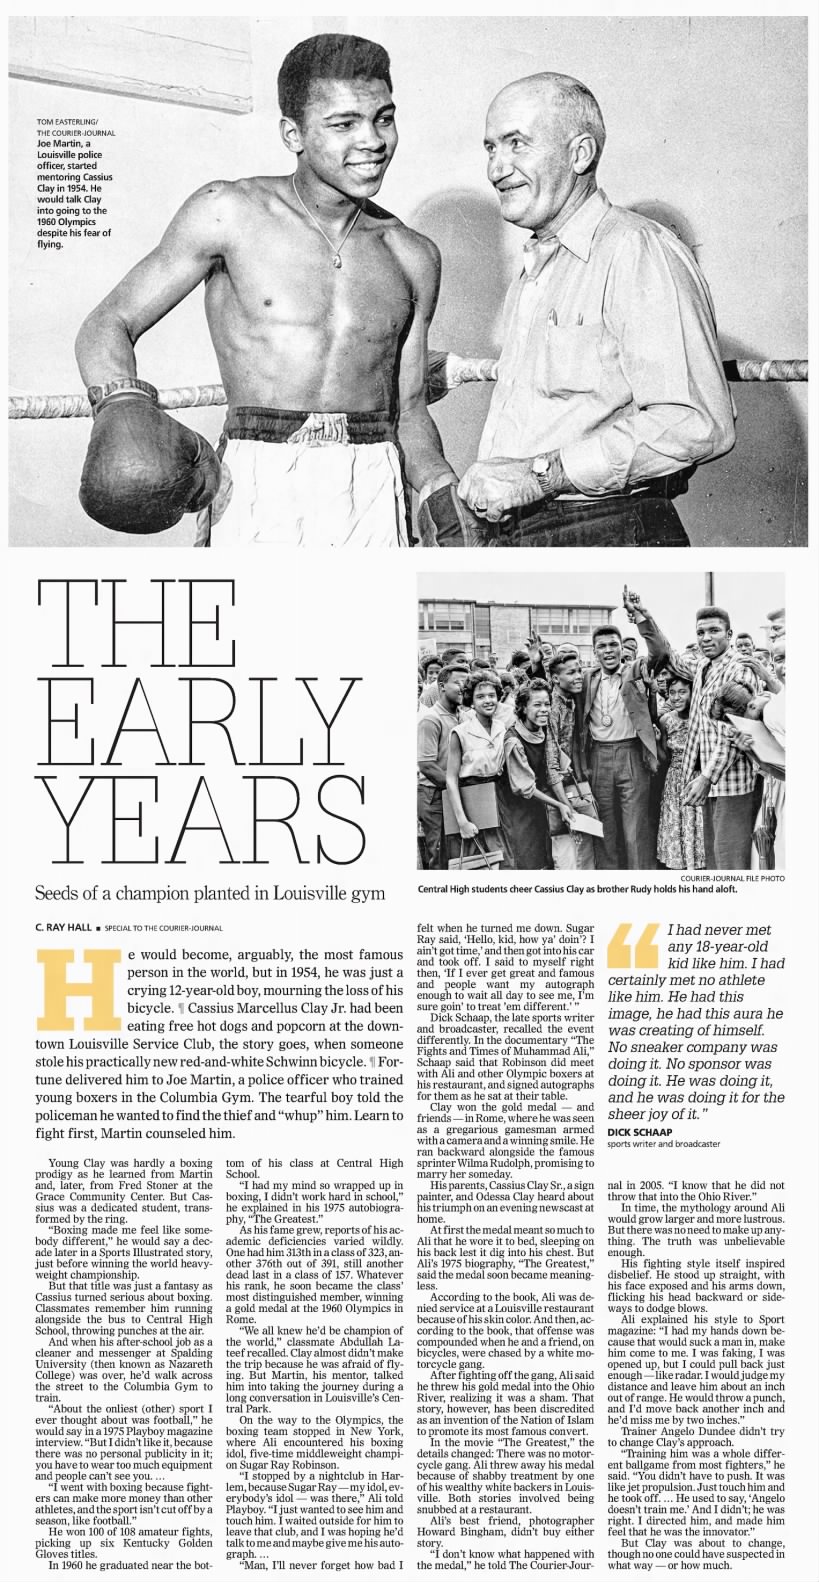 Newspaper retrospective on the early years of Cassius Clay (Muhammad Ali)